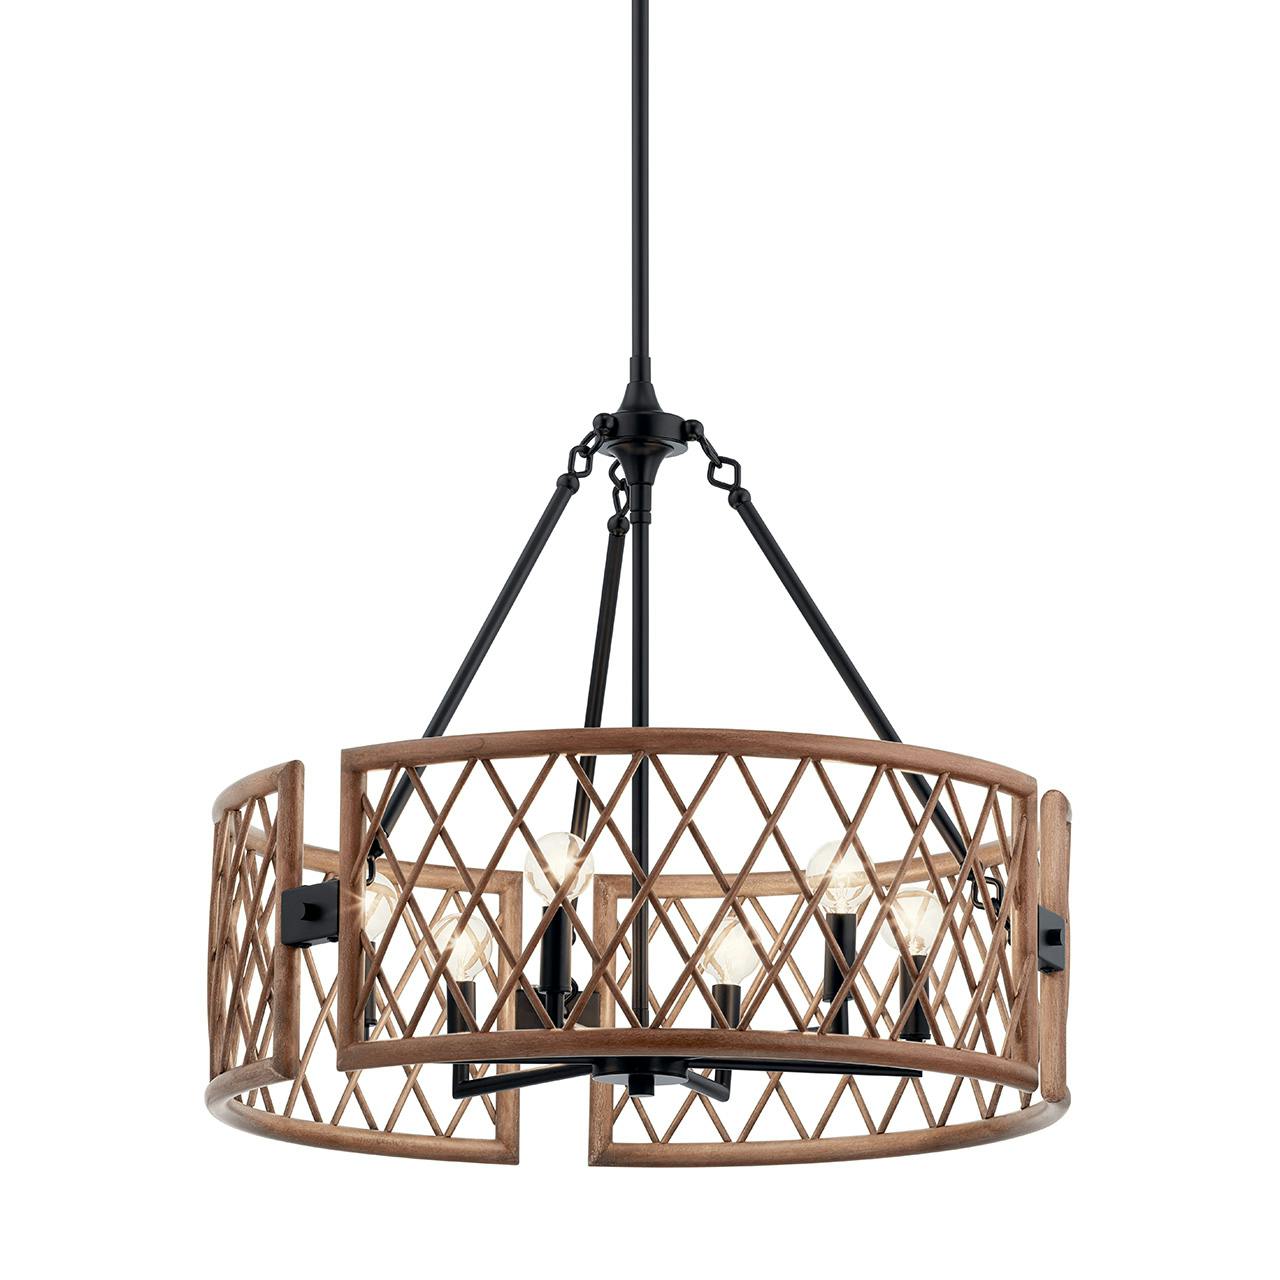 Oana™ 6 Light Chandelier in Palm without the canopy on a white background